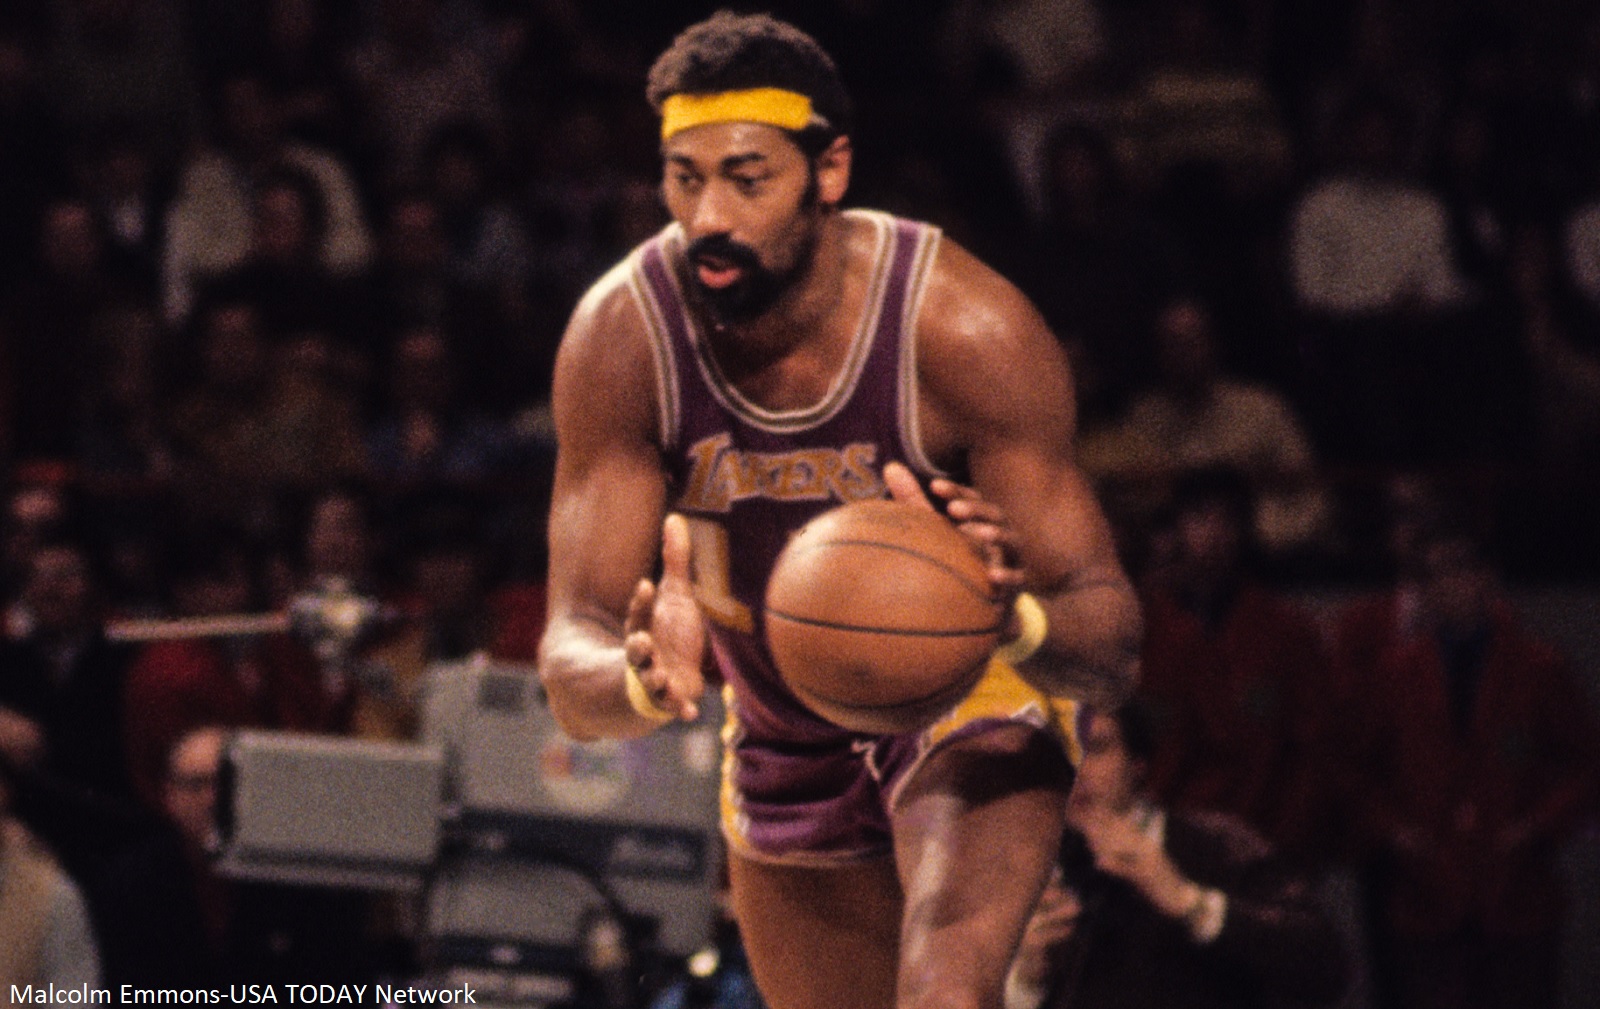 Before His Death in 1999, Wilt Chamberlain Had an Interesting Take